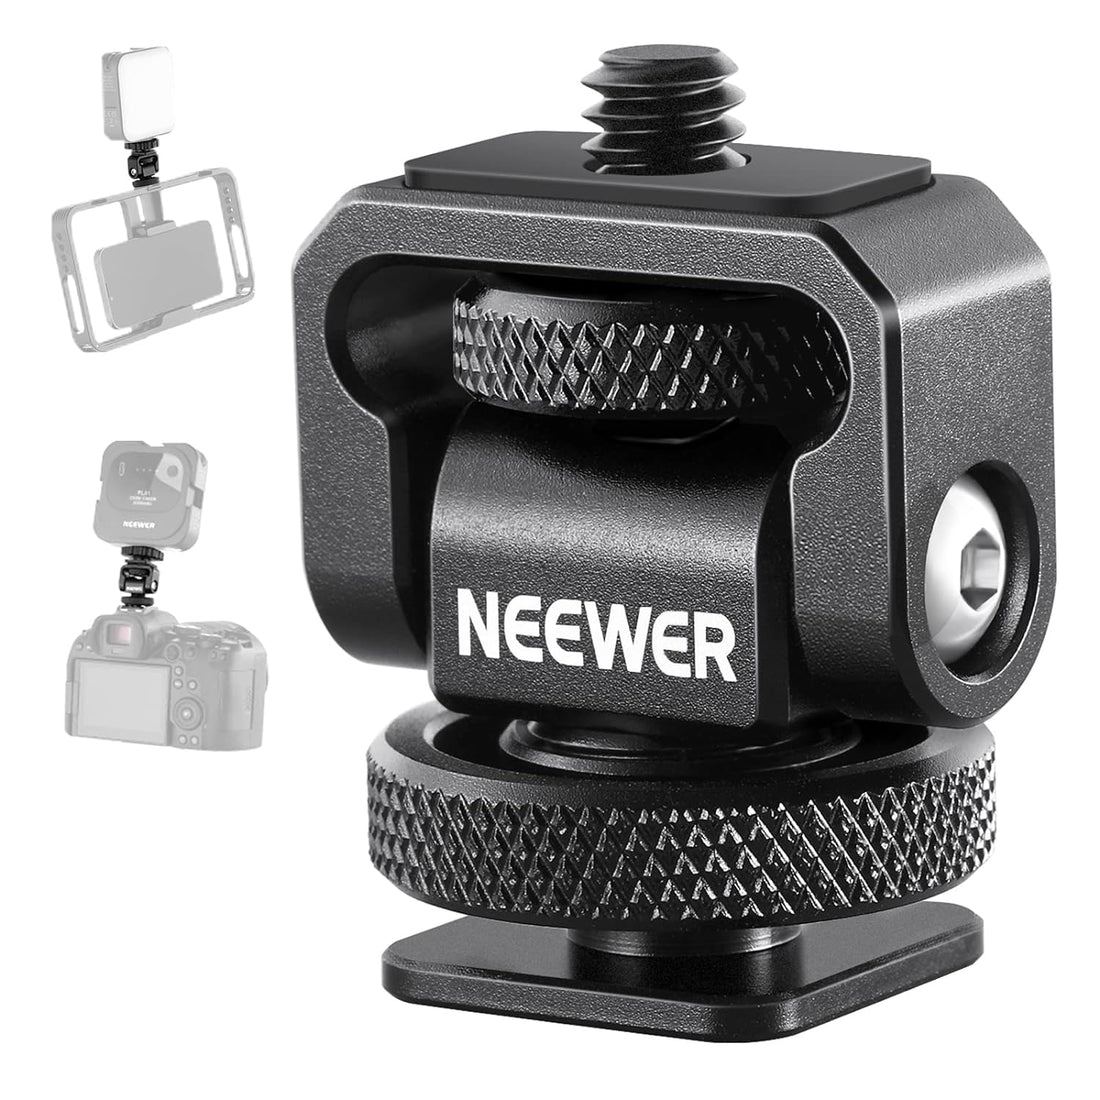 NEEWER 1/4" Mini Cold Shoe Mount Adapter Compatible with SmallRig Camera Phone Cage Rig, LED Video Light, Vlog Accessories, Mount Head Supports 138° Tilt Adjustment, Aluminum Alloy Structure, ST37